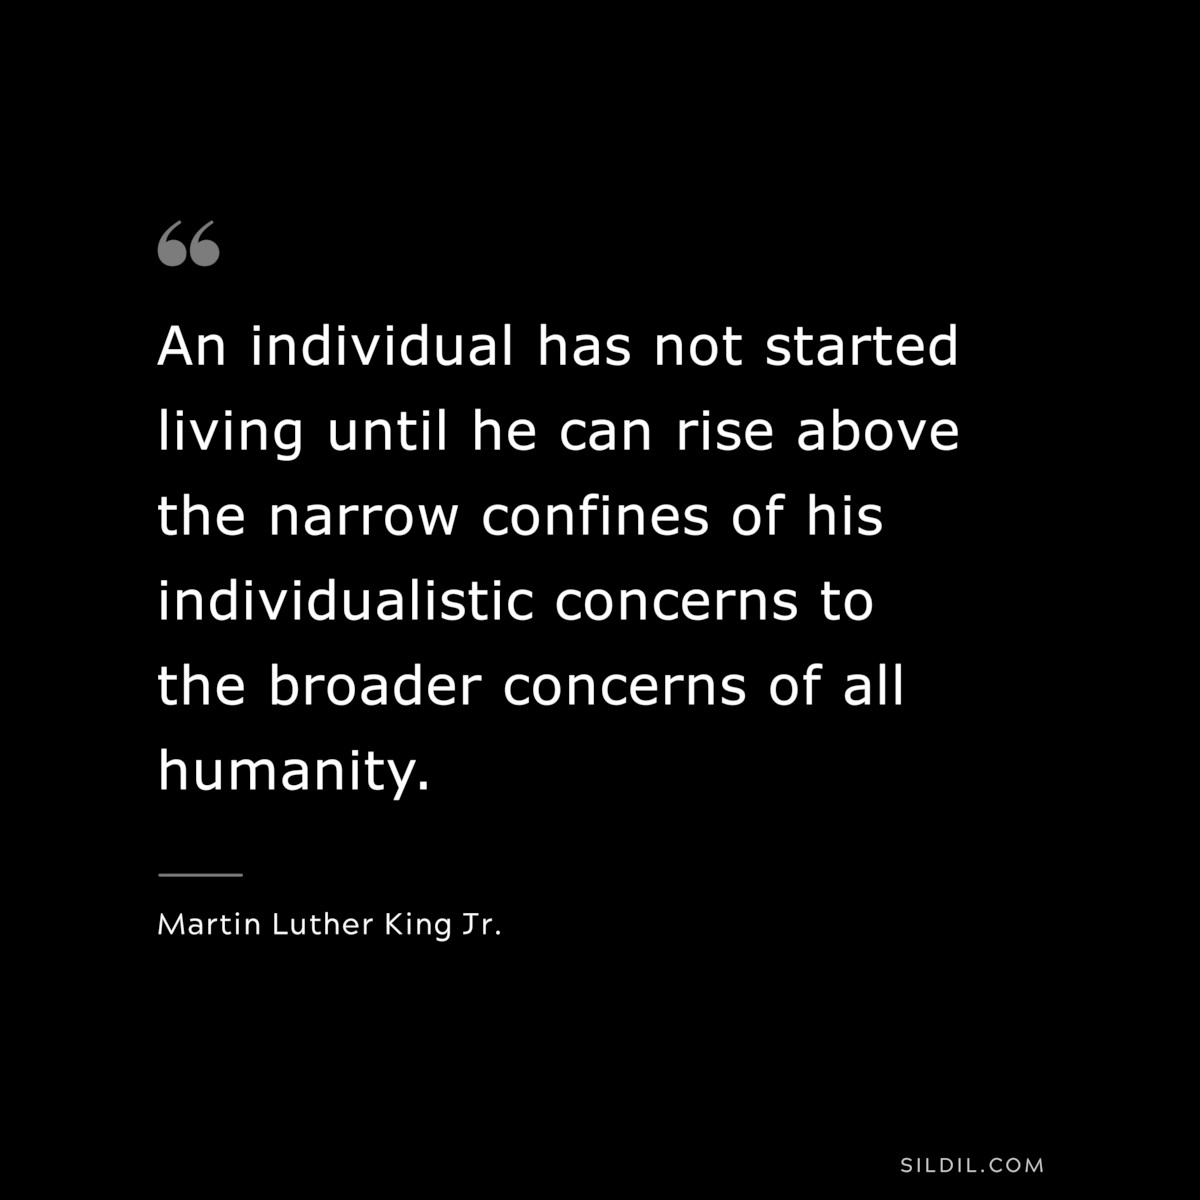 An individual has not started living until he can rise above the narrow confines of his individualistic concerns to the broader concerns of all humanity. ― Martin Luther King Jr.